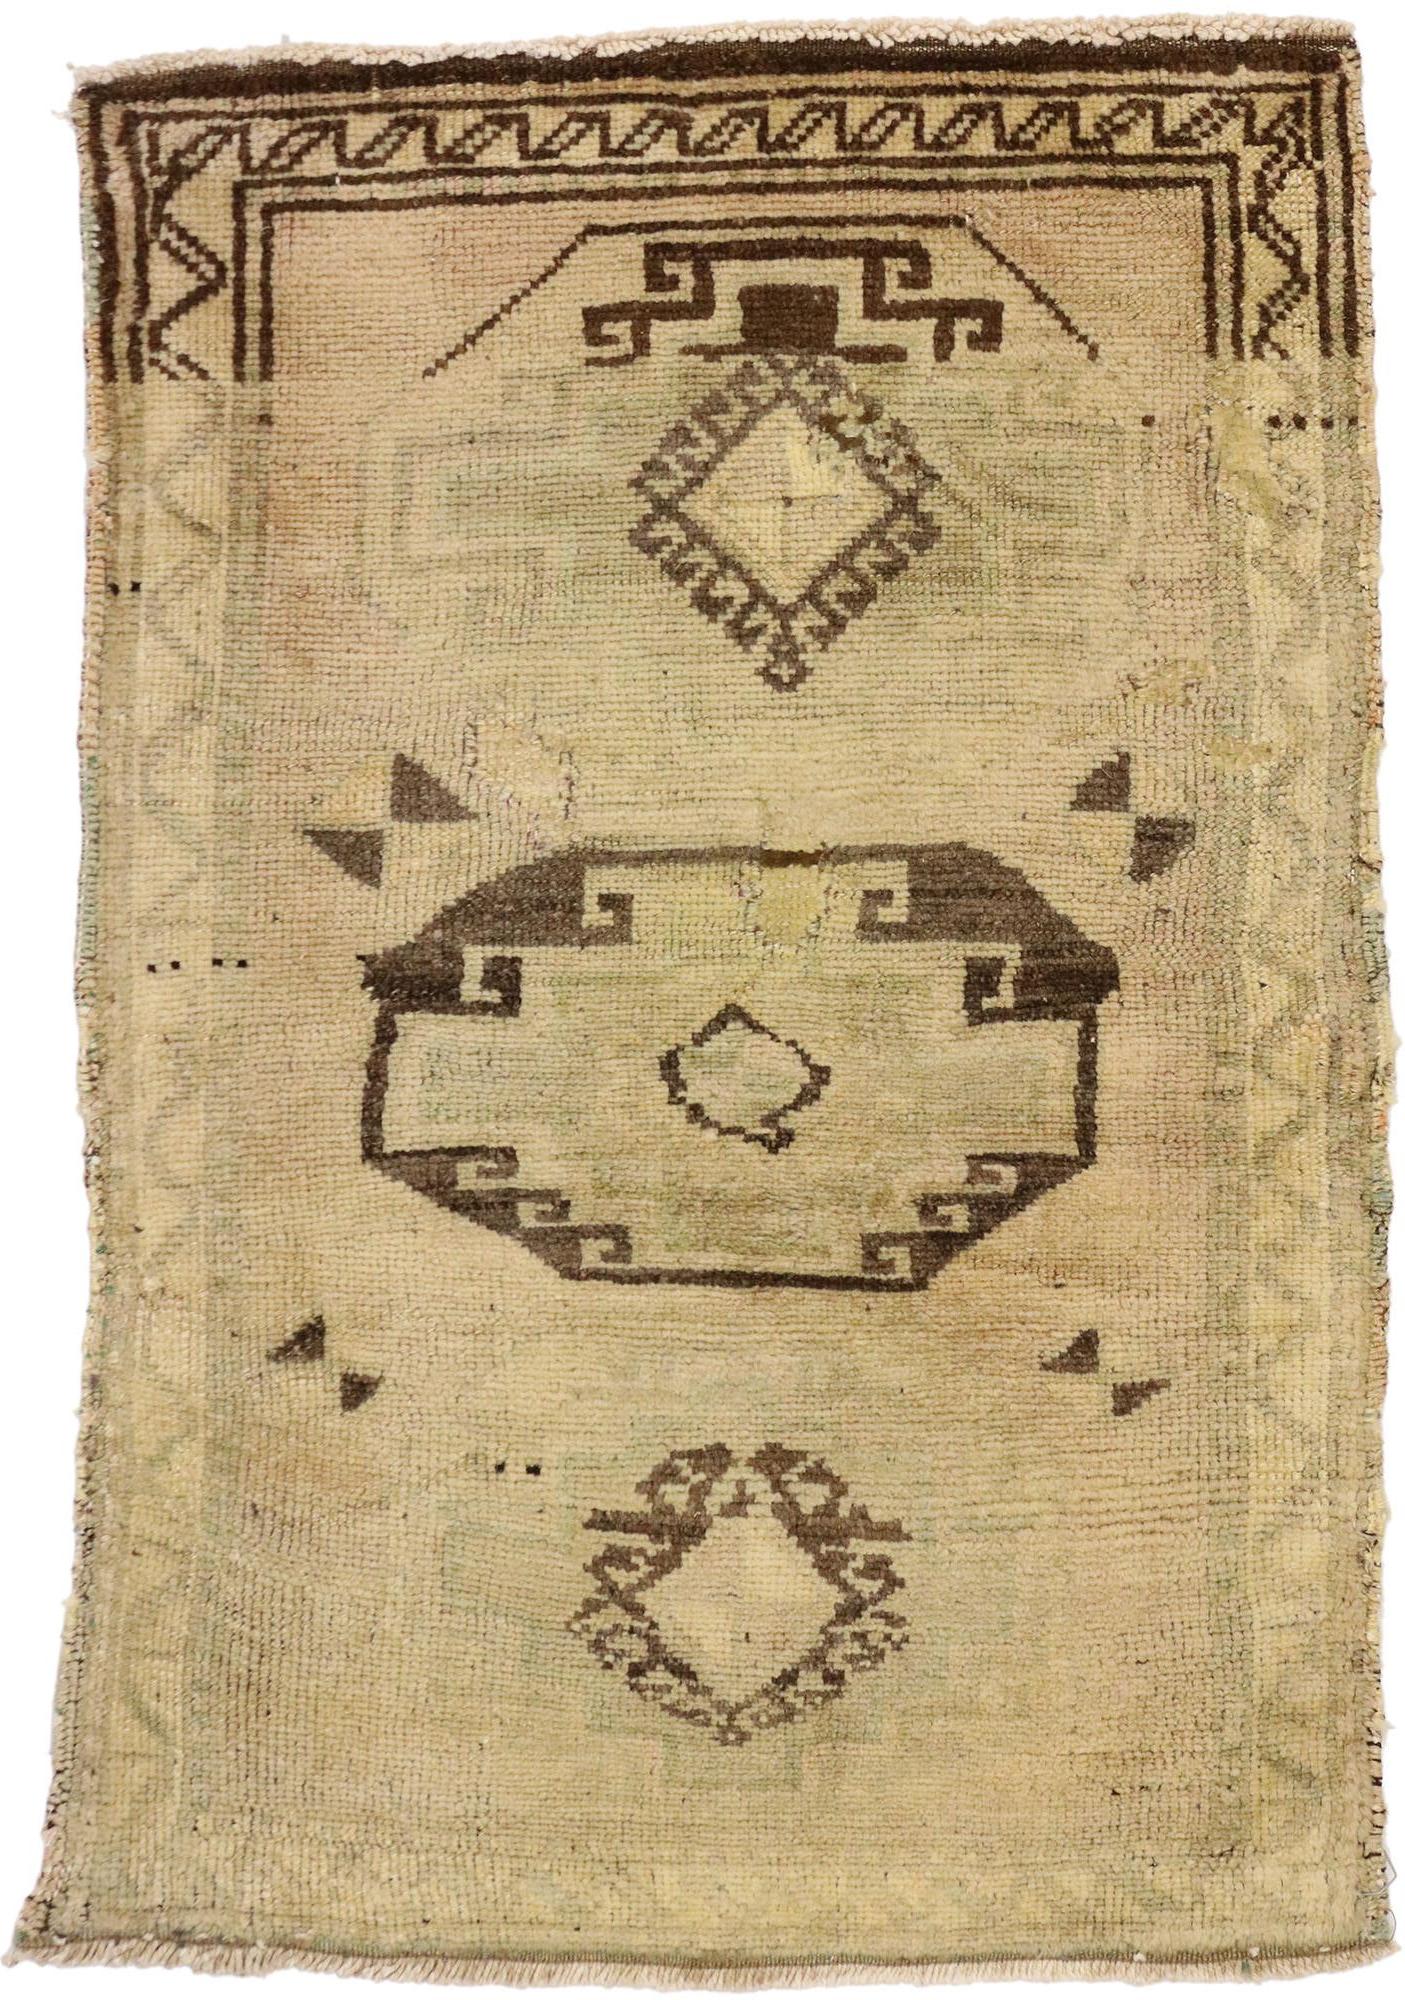 51426 Vintage Turkish Oushak Yastik Scatter Rug, Small Accent Rug 02'00 x 02'11. This vintage Turkish Oushak rug features a modern traditional style. Immersed in Anatolian history and muted colors, this vintage Oushak yastik scatter rug combines